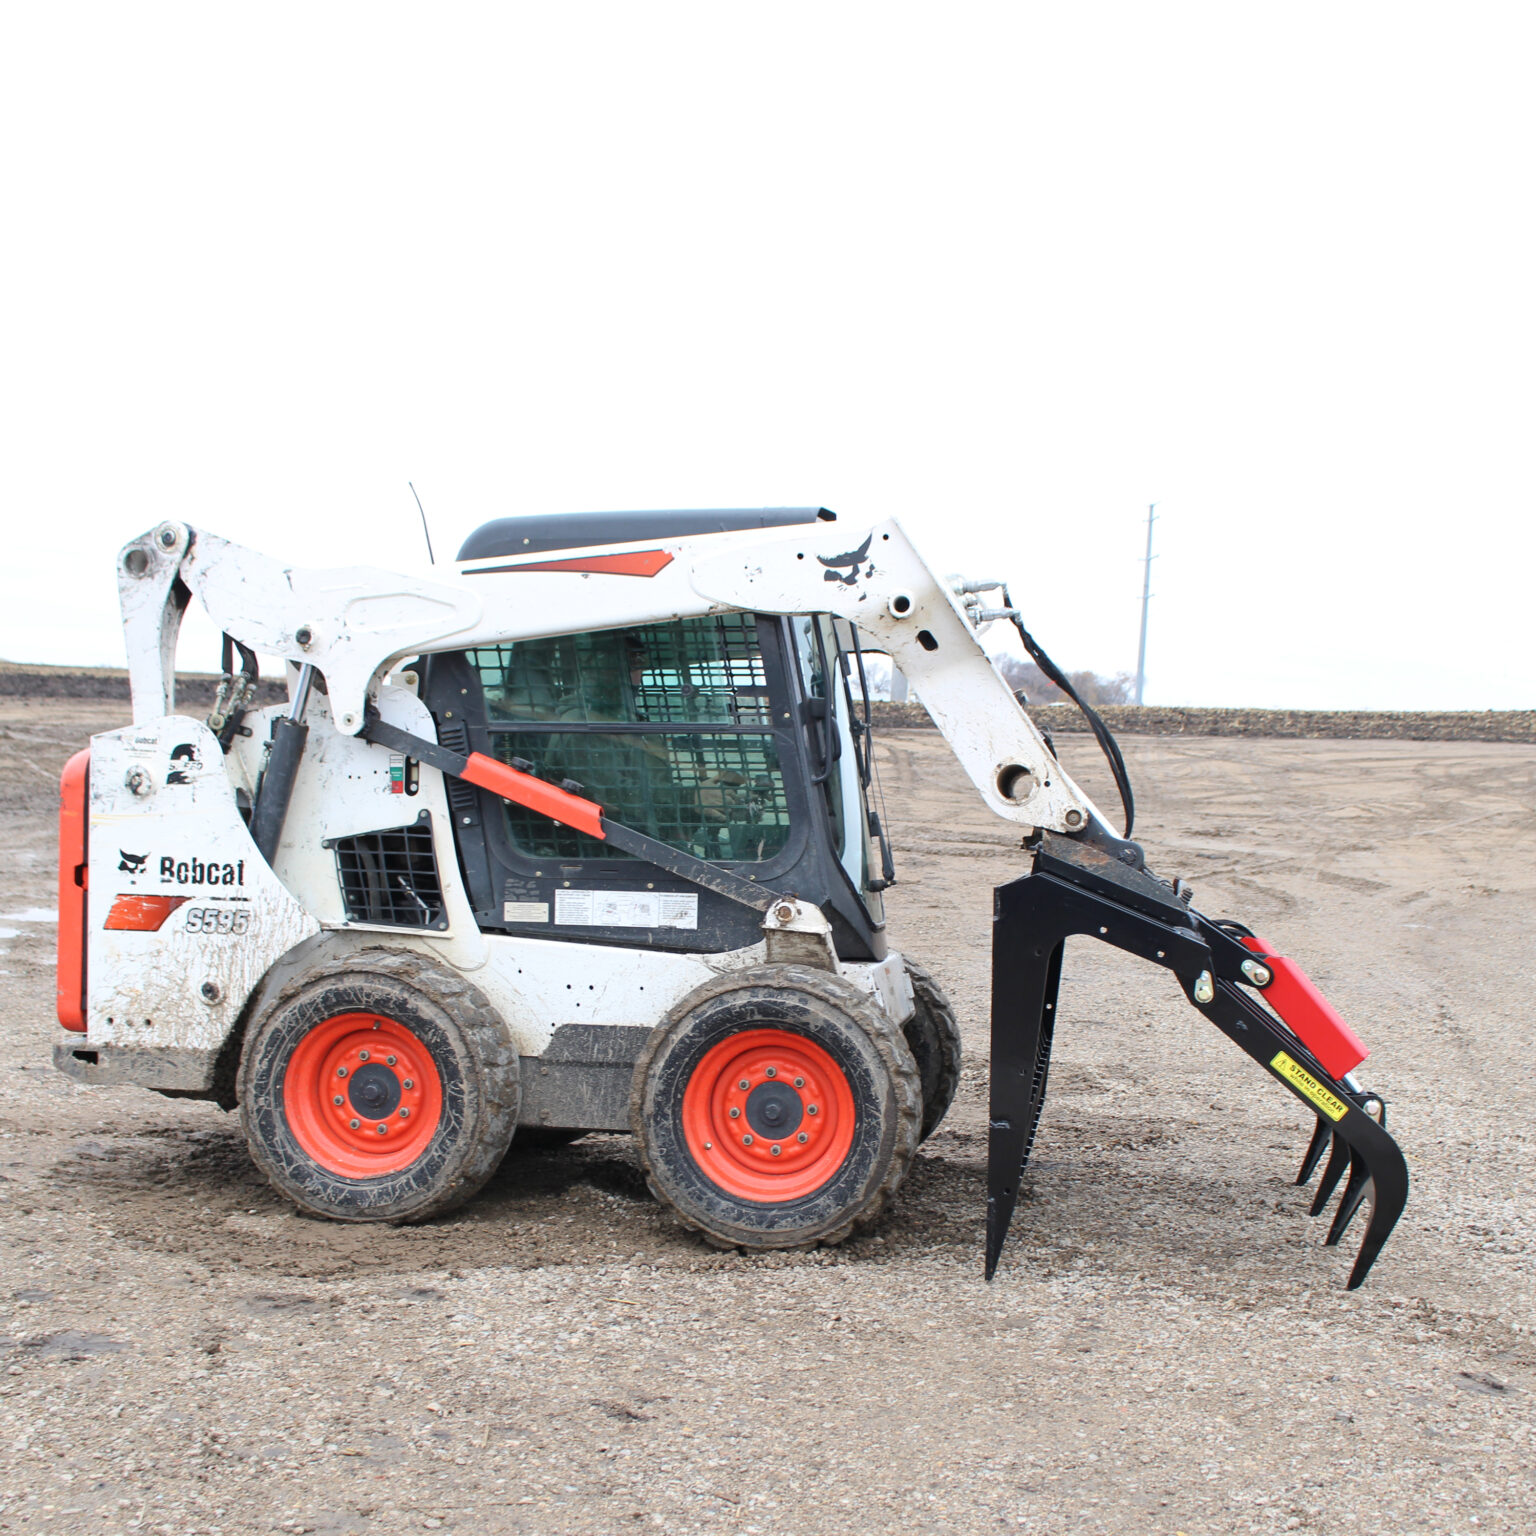 A Bobcat skid-steer loader with a Messer brush attachment featuring an open grapple on the ground.